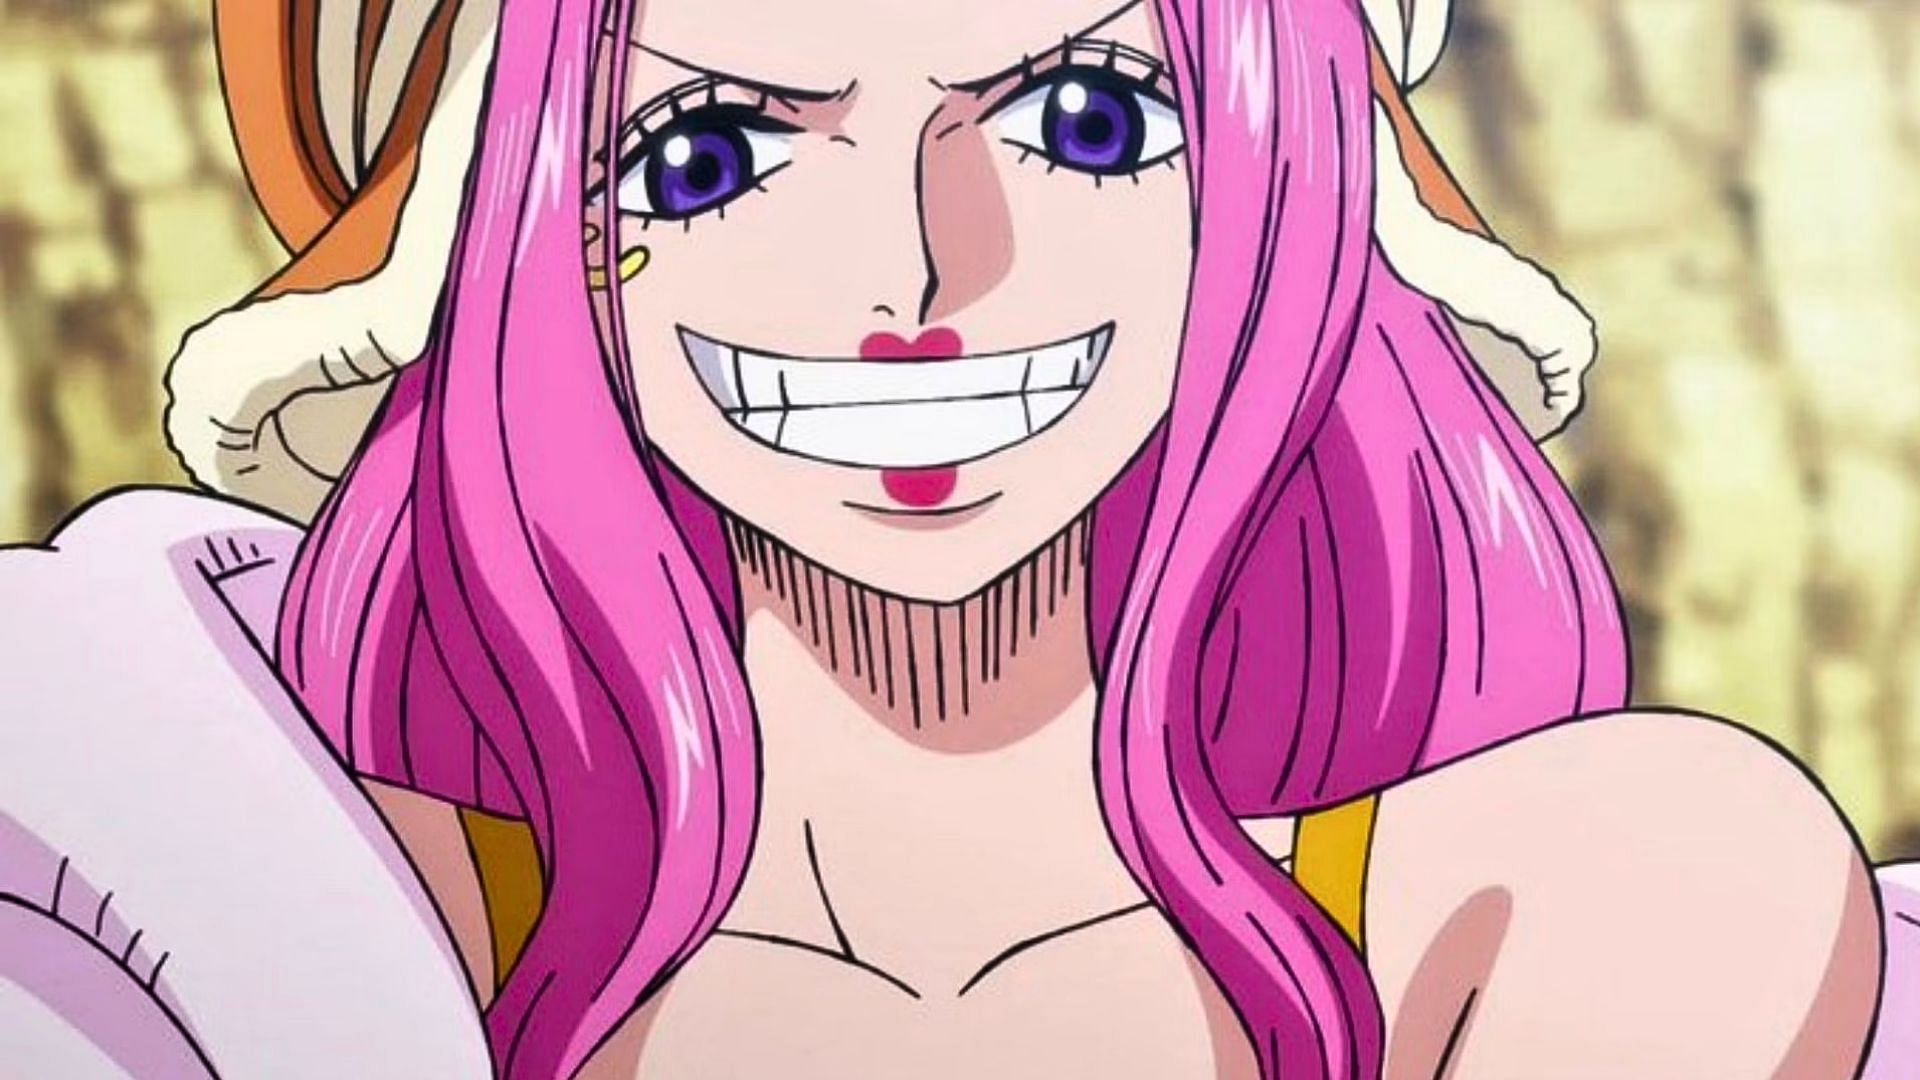 Bonney as seen in One Piece (Image via Toei Animation)